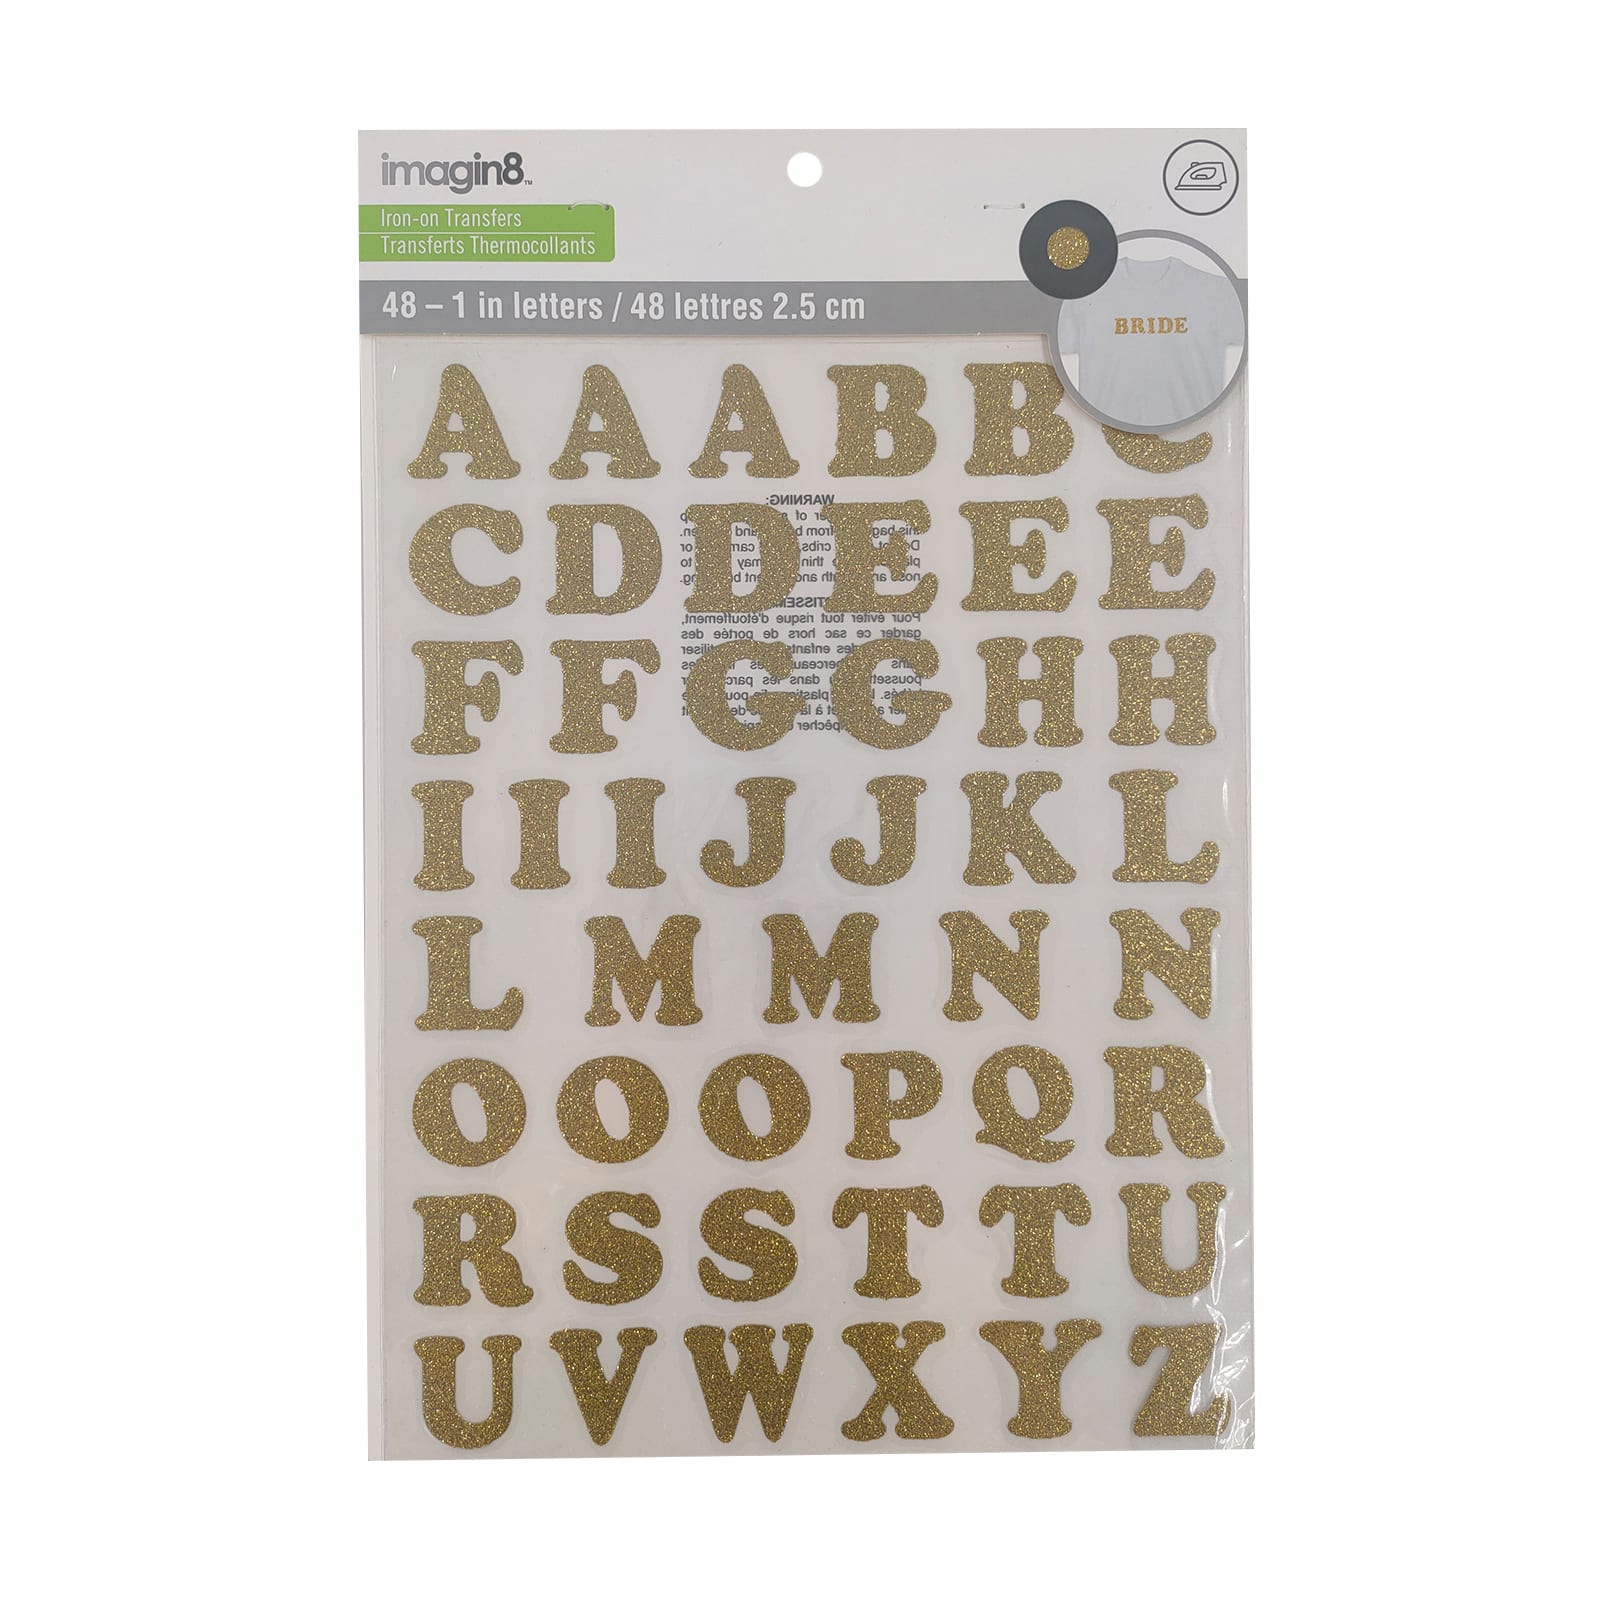 1 Gold Iron-On Glitter Caston Letters by Make Market®